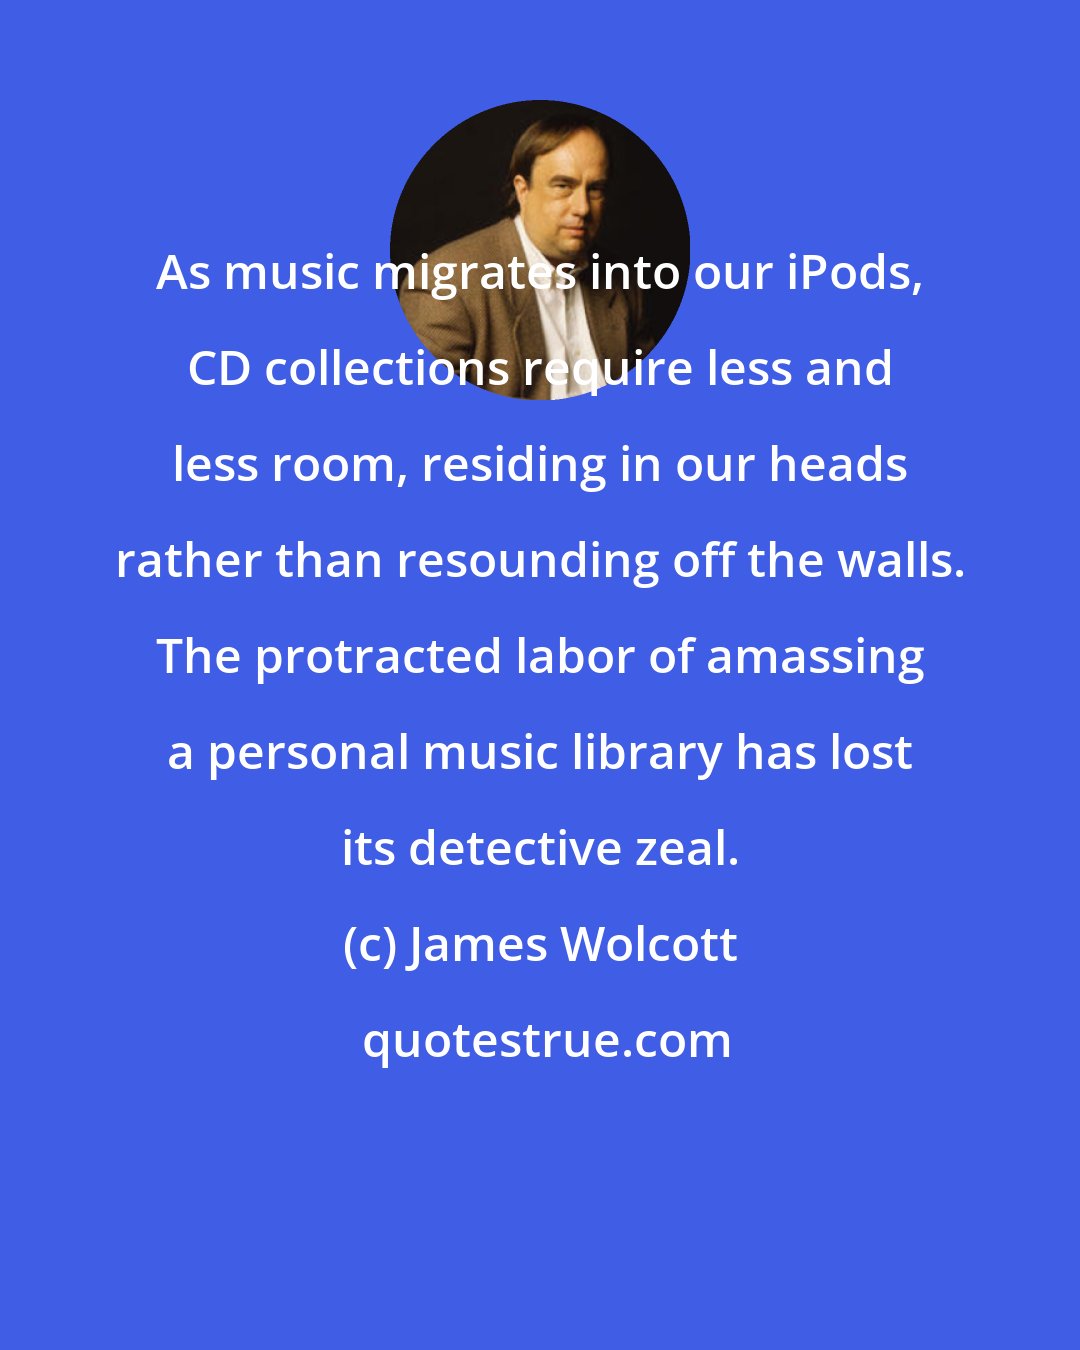 James Wolcott: As music migrates into our iPods, CD collections require less and less room, residing in our heads rather than resounding off the walls. The protracted labor of amassing a personal music library has lost its detective zeal.